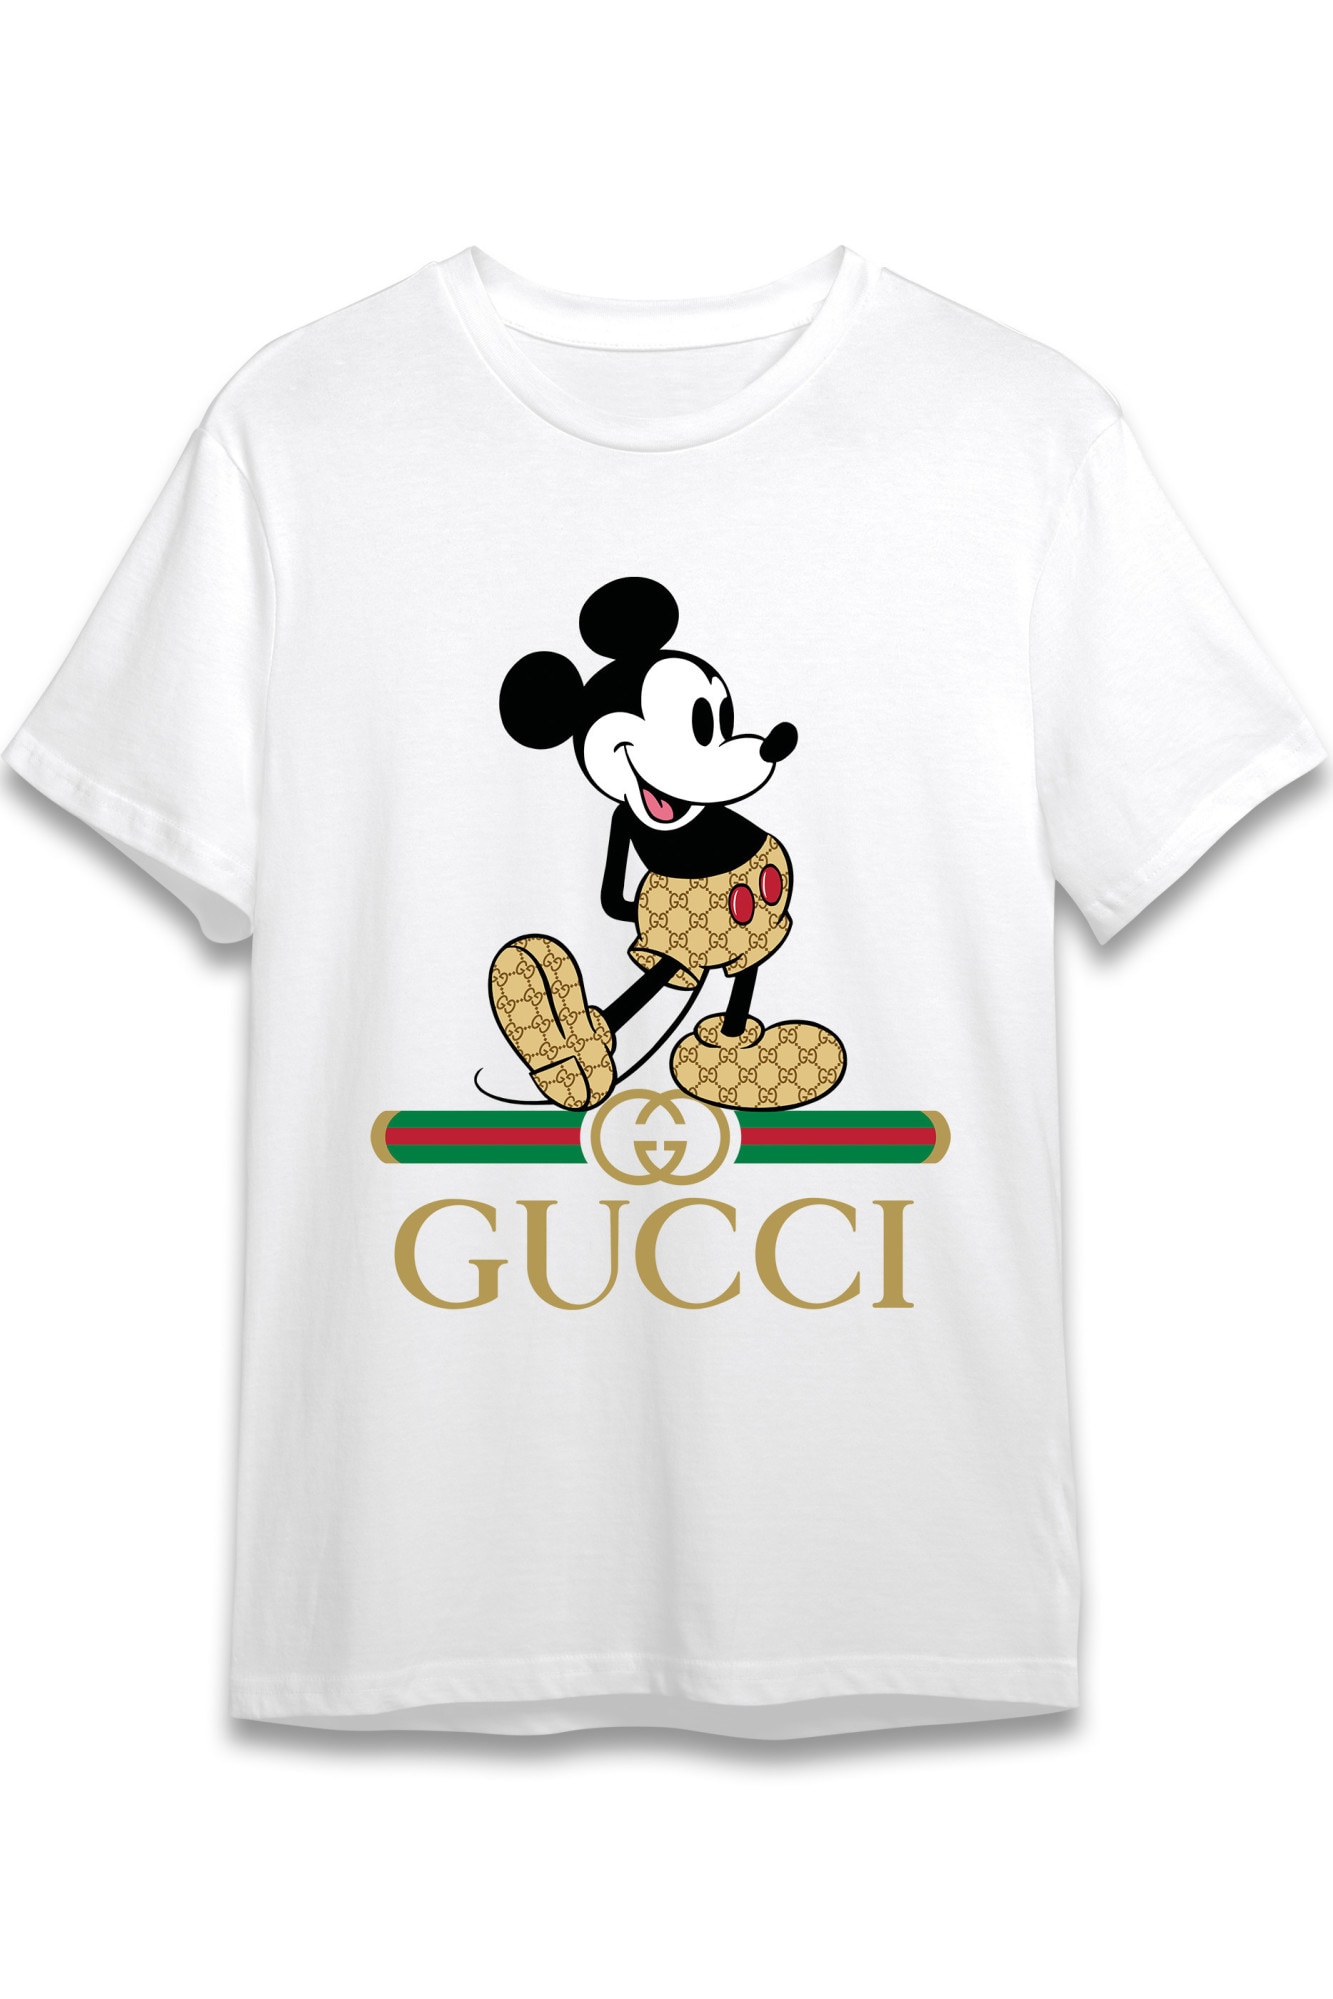 Tricou Clasic Mouse, Parodie Gucci, Unisex, 100% Bumbac, L - eMAG.ro